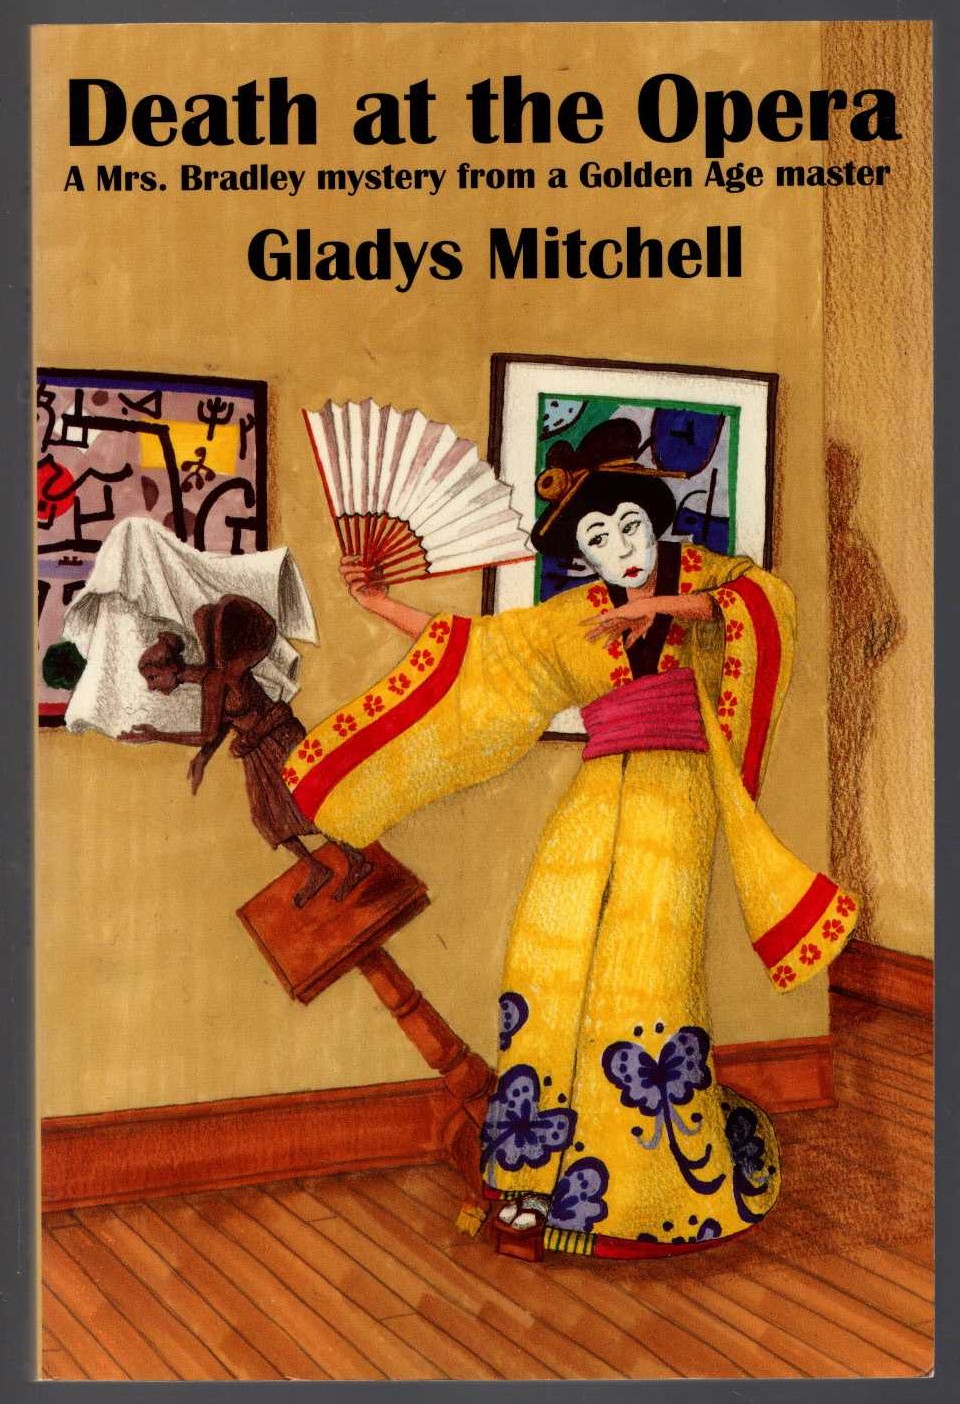 Gladys Mitchell  DEATH AT THE OPERA front book cover image